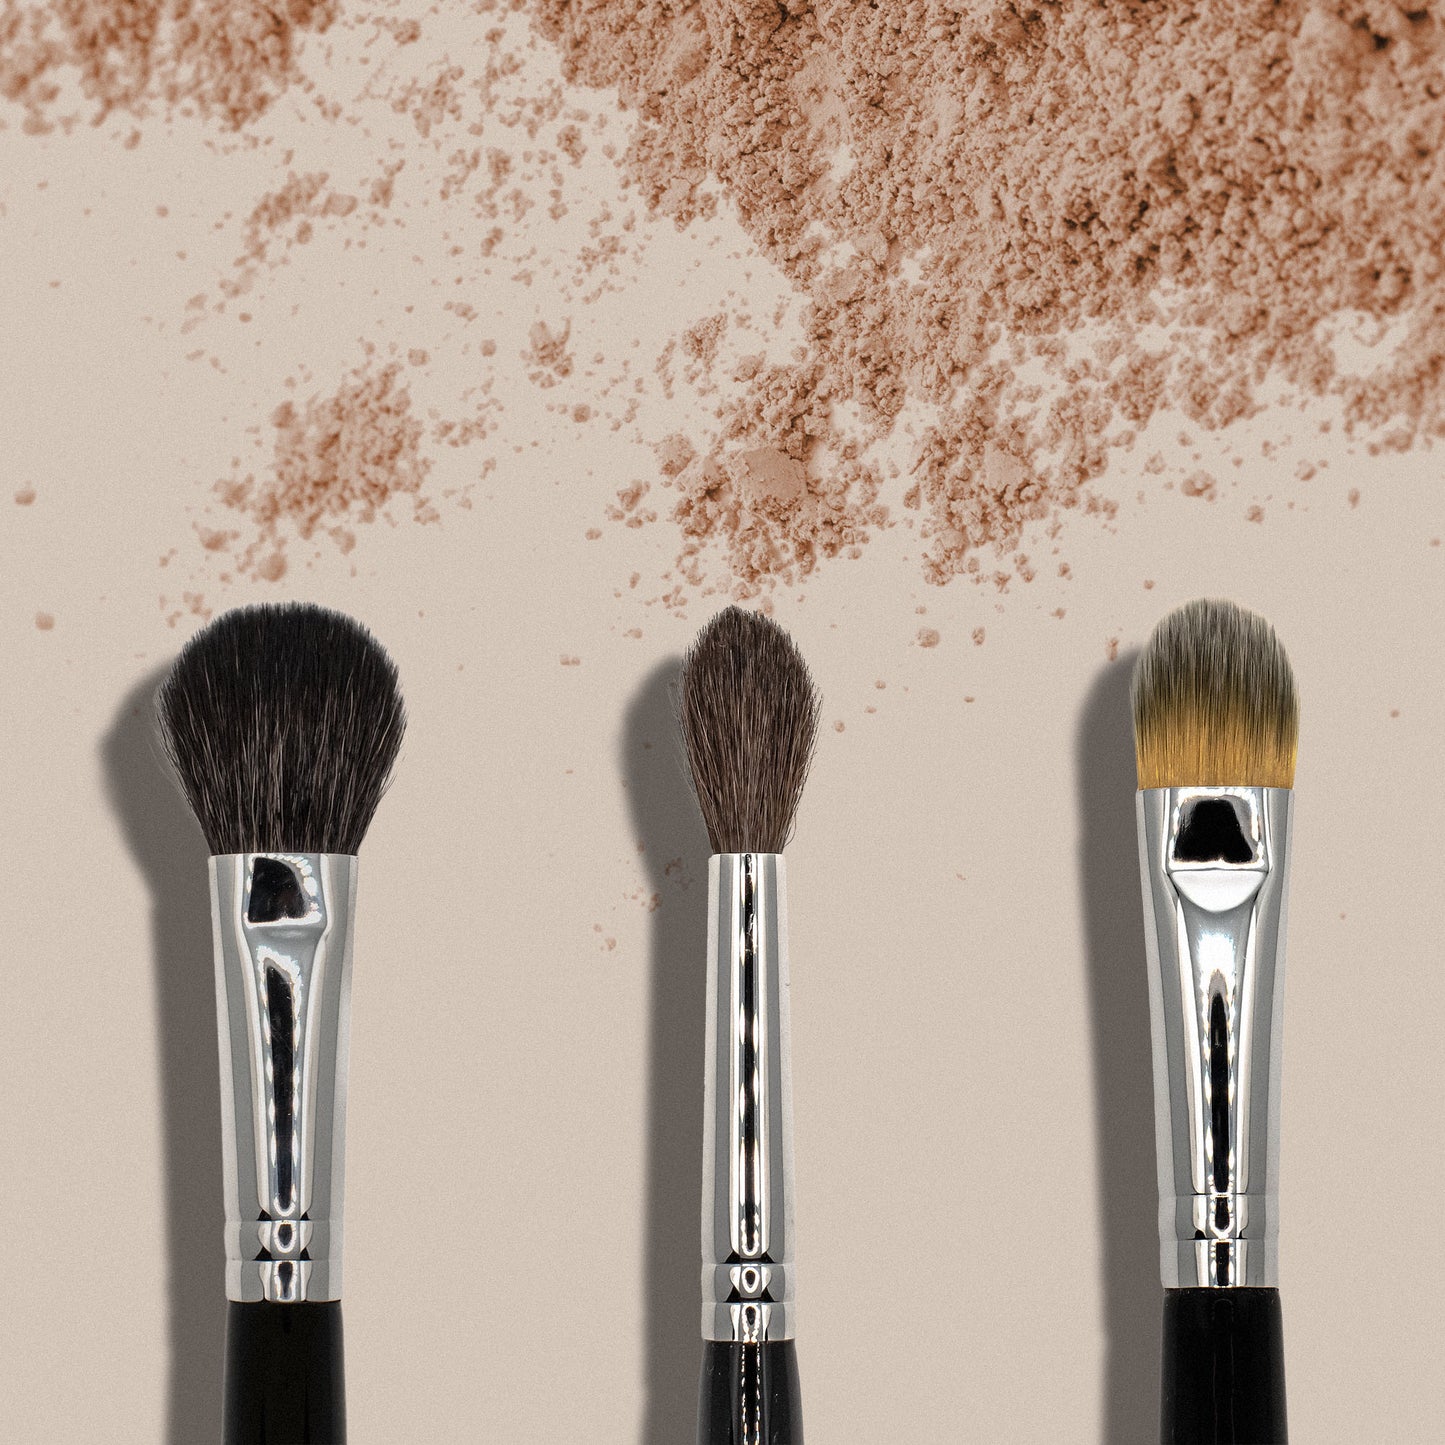 Looking for seamless blending? The Cruisin Organics tapered blender brush is here to take on the challenge! With natural goat hair and precise design, this brush expertly softens eyeshadows, highlights the brow bone, and enhances any makeup look. Get ready to blend with confidence!